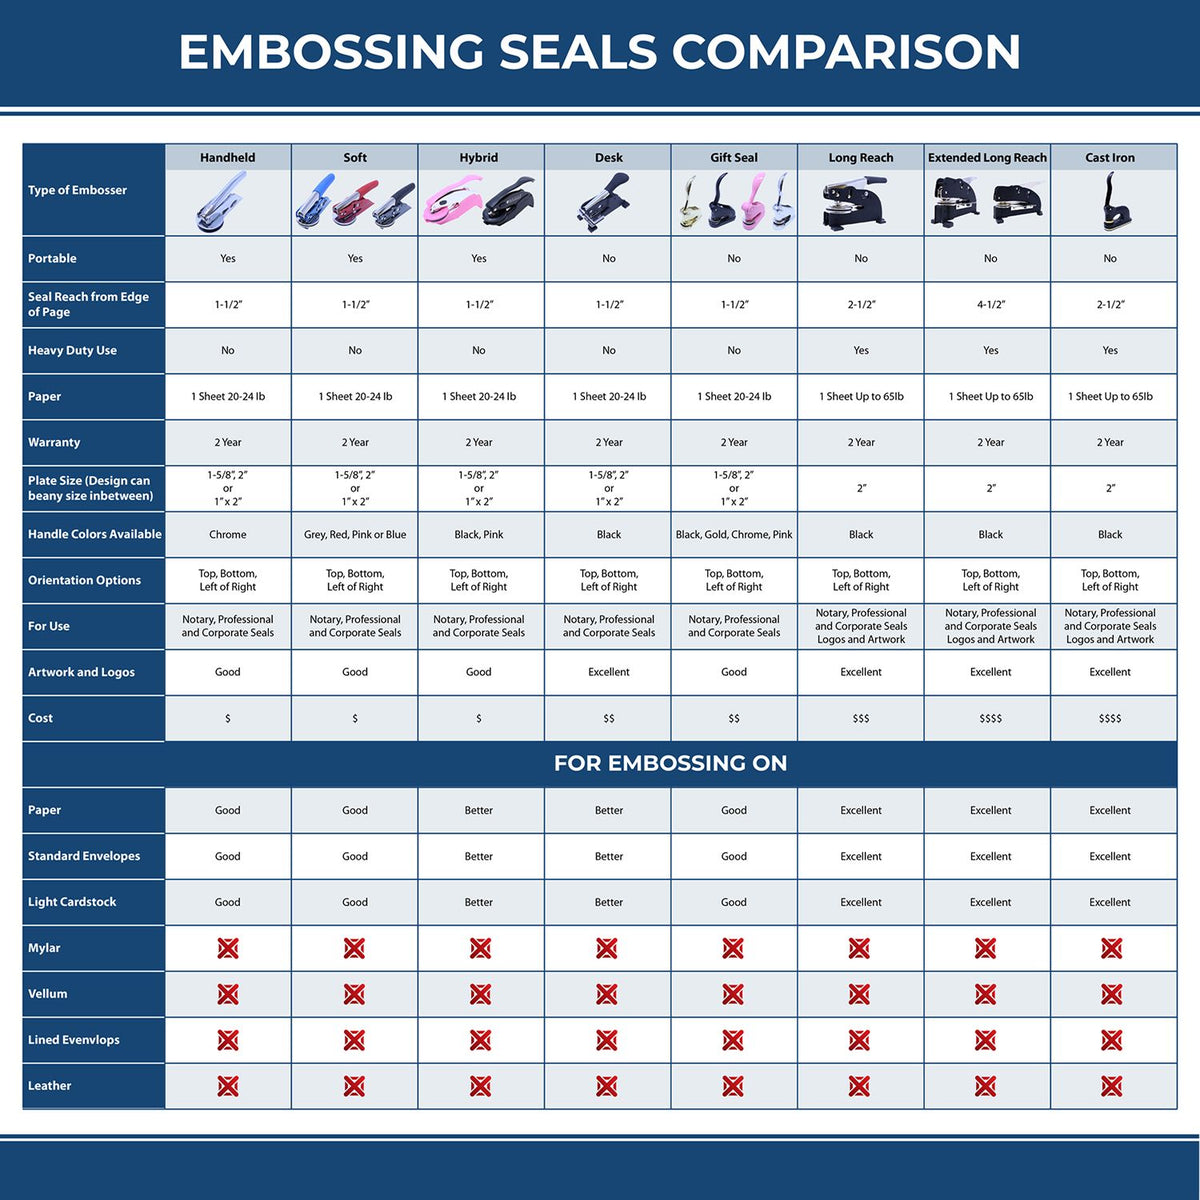 A comparison chart for the different types of mount models available for the Handheld Florida Land Surveyor Seal.